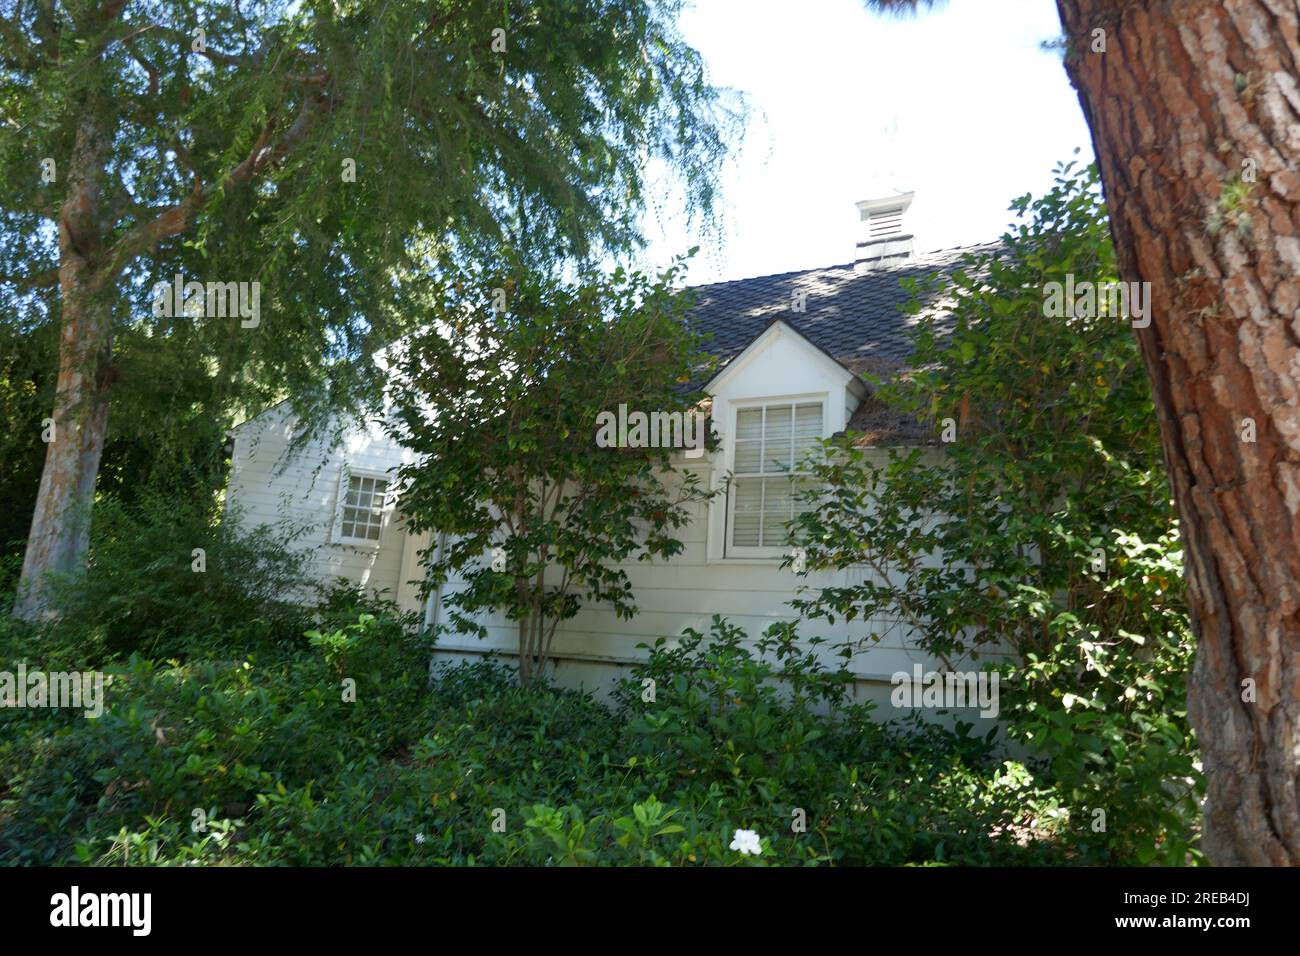 Los Angeles, California, USA 26th July 2023 Actress Marilu Jenner Former Home/house at 9222 Flicker Way in the Bird Streets on July 26, 2023 in Los Angeles, California, USA. Photo by Barry King/Alamy Stock Photo Stock Photo